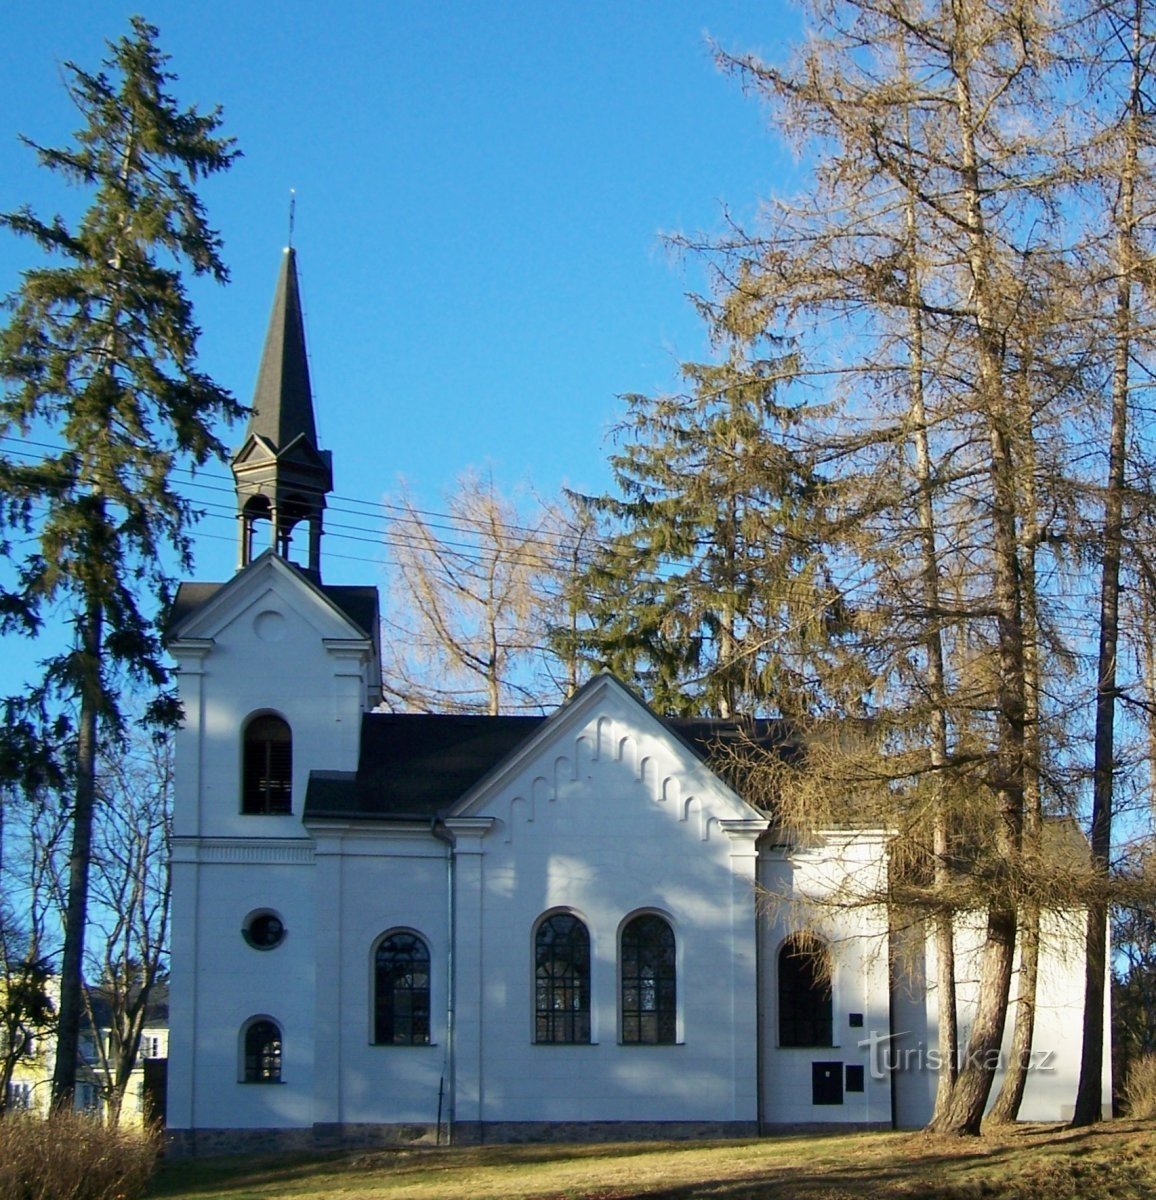 Chapel of Our Lady of Lourdes